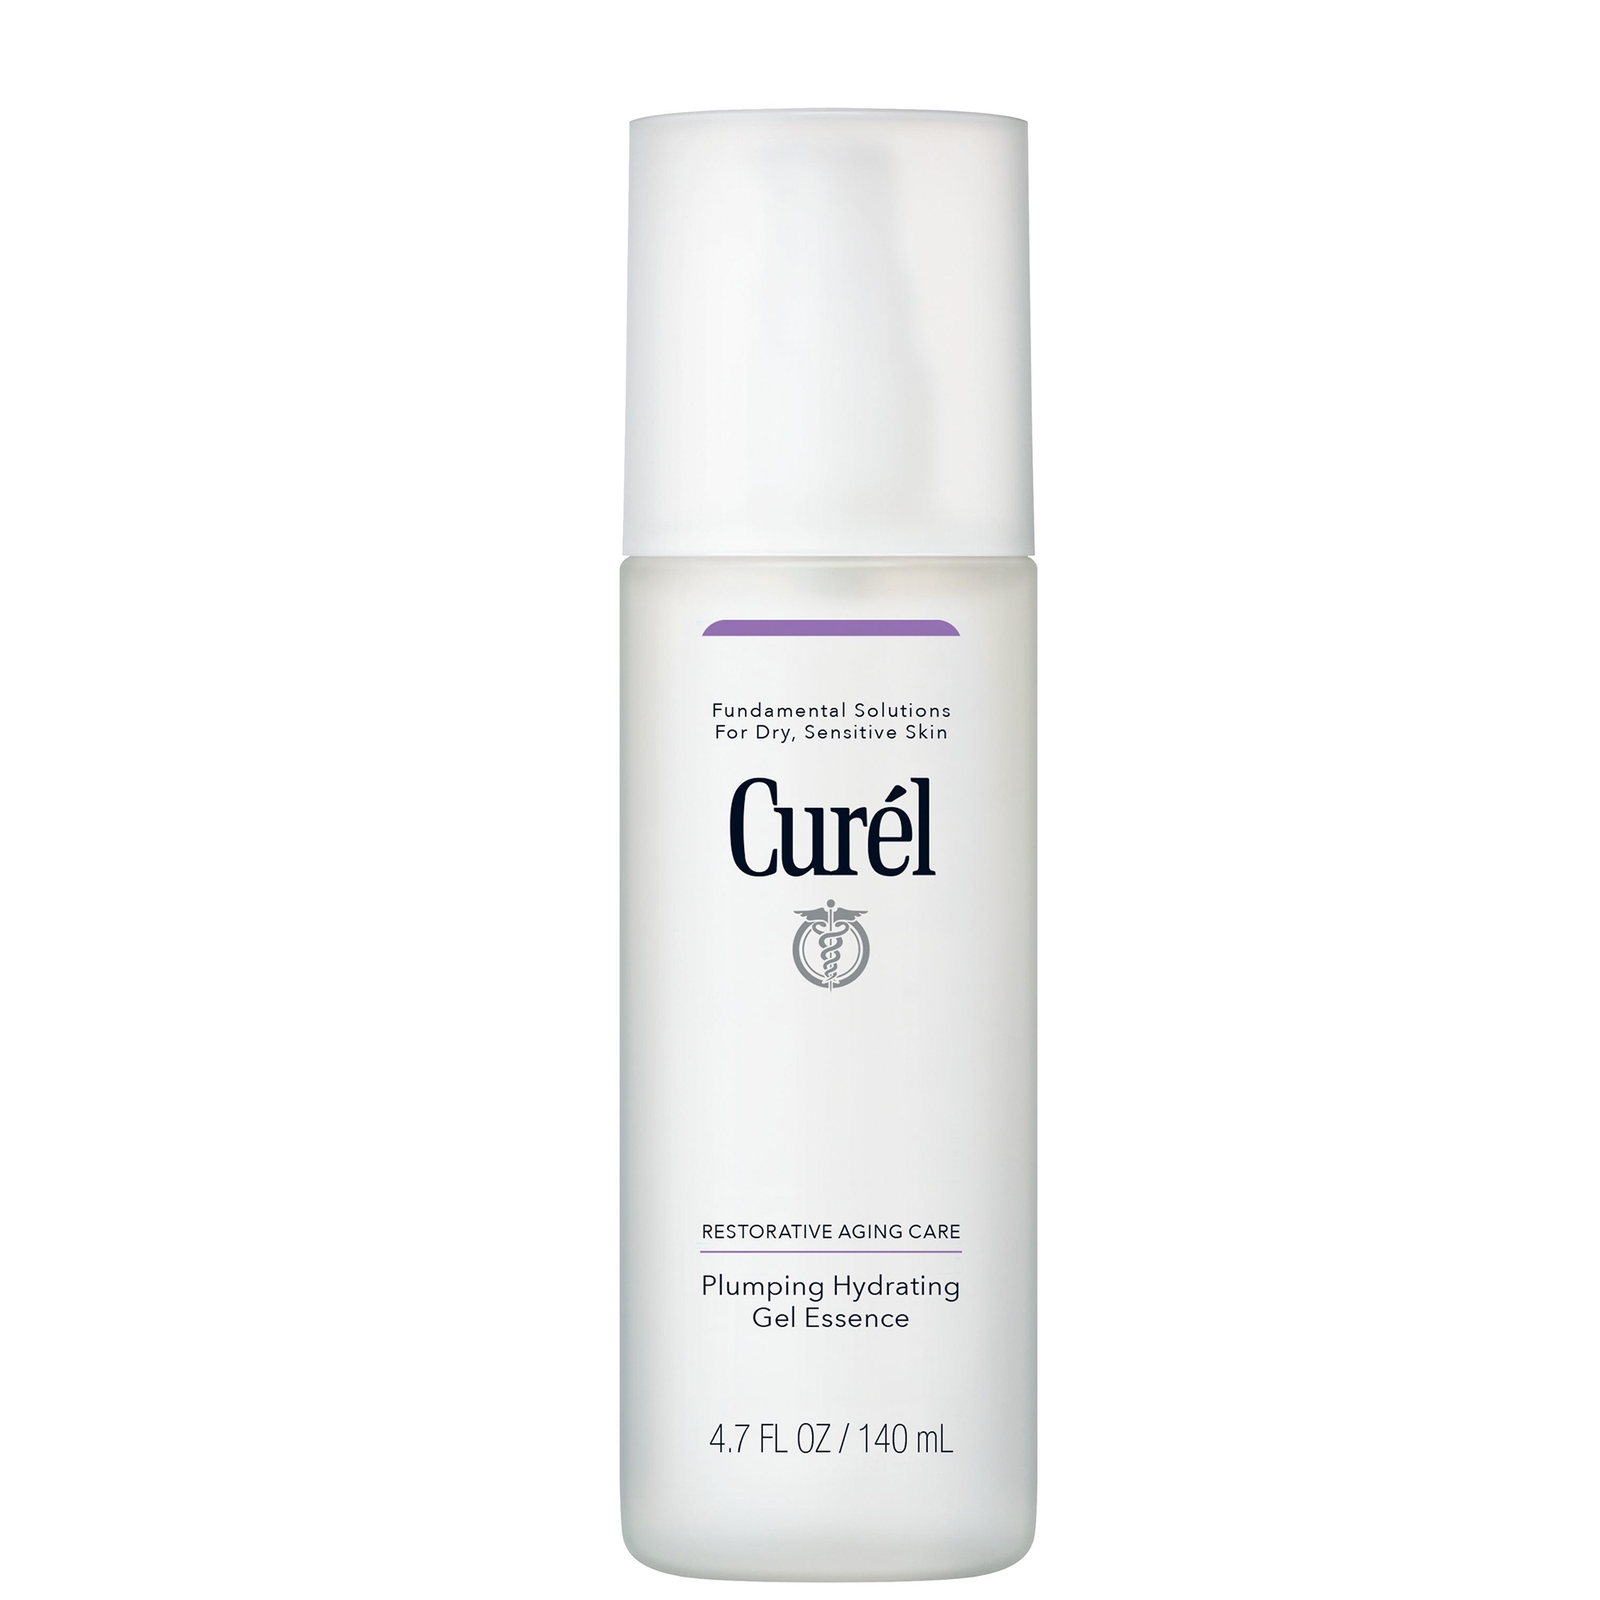 Image of Curél Plumping Hydrating Gel Essence for Dry, Sensitive Skin 140ml